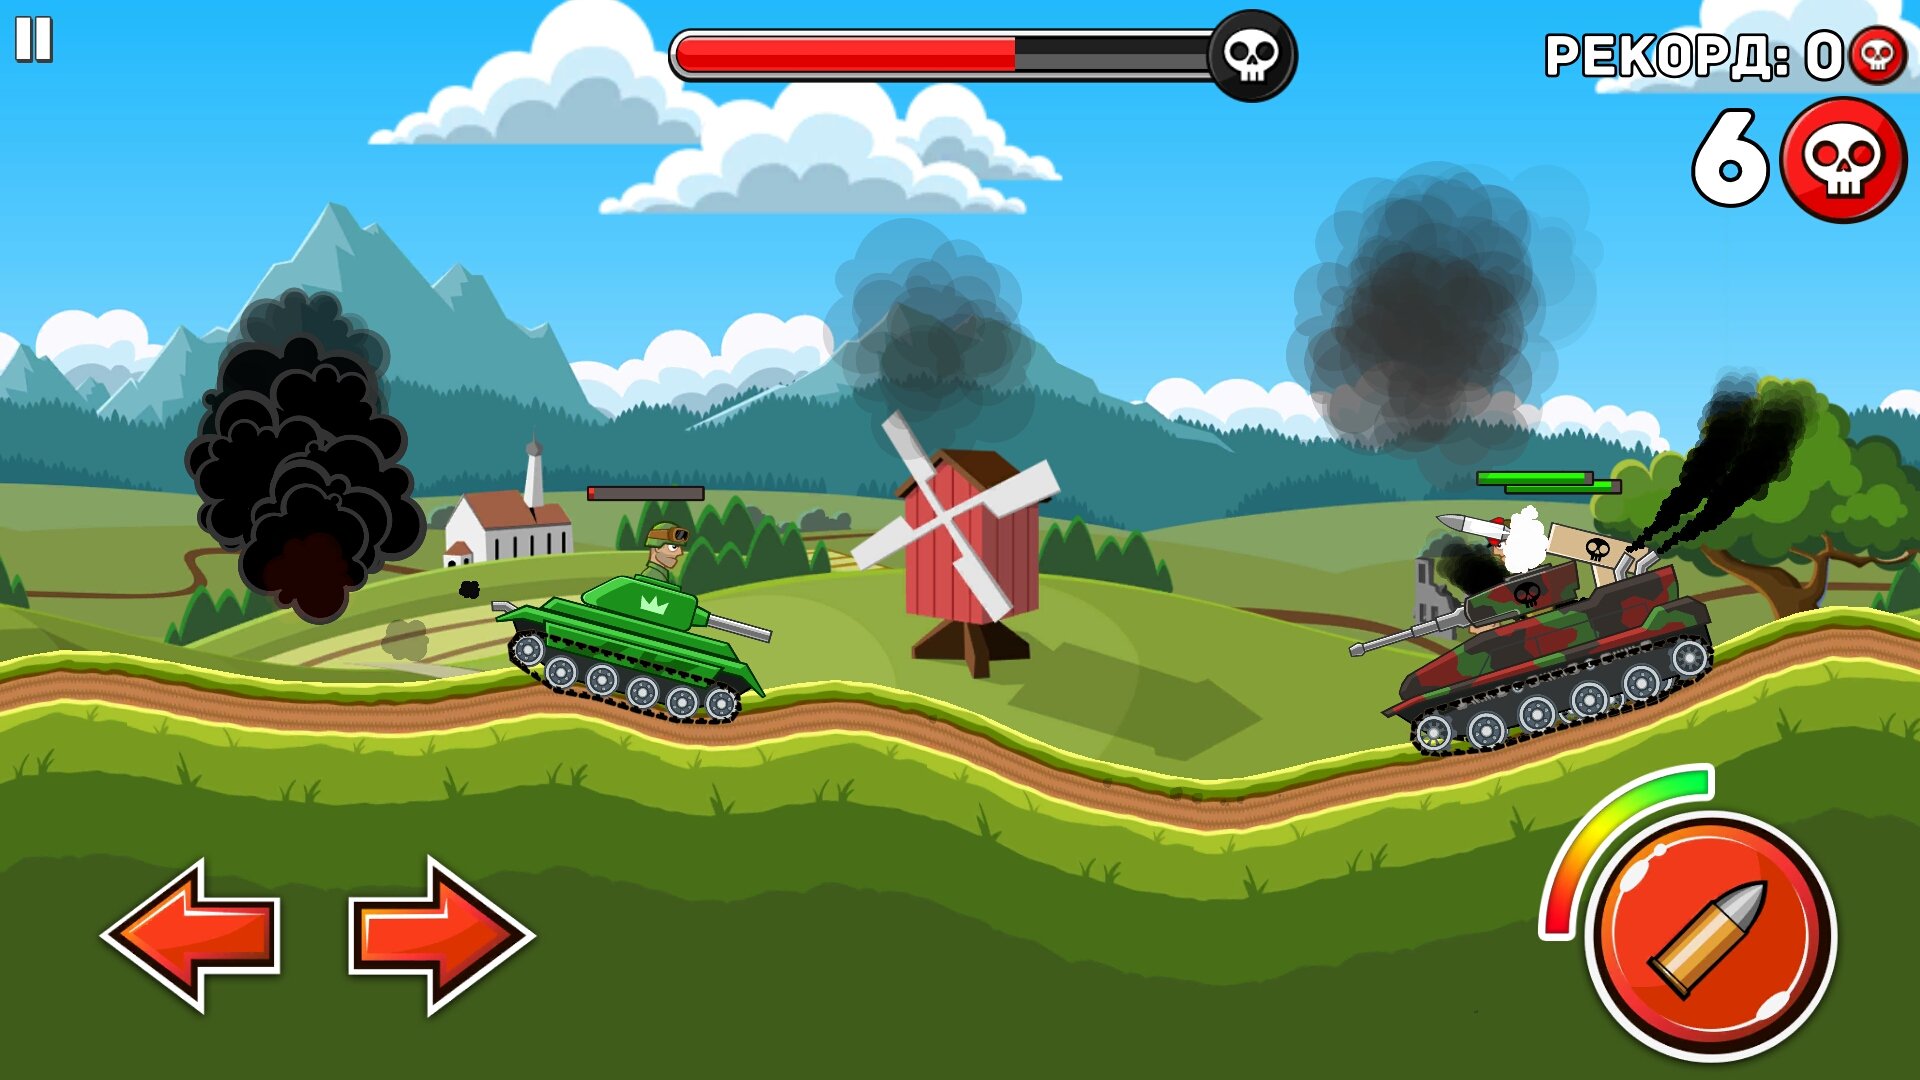 for iphone download Tank Stars - Hills of Steel free